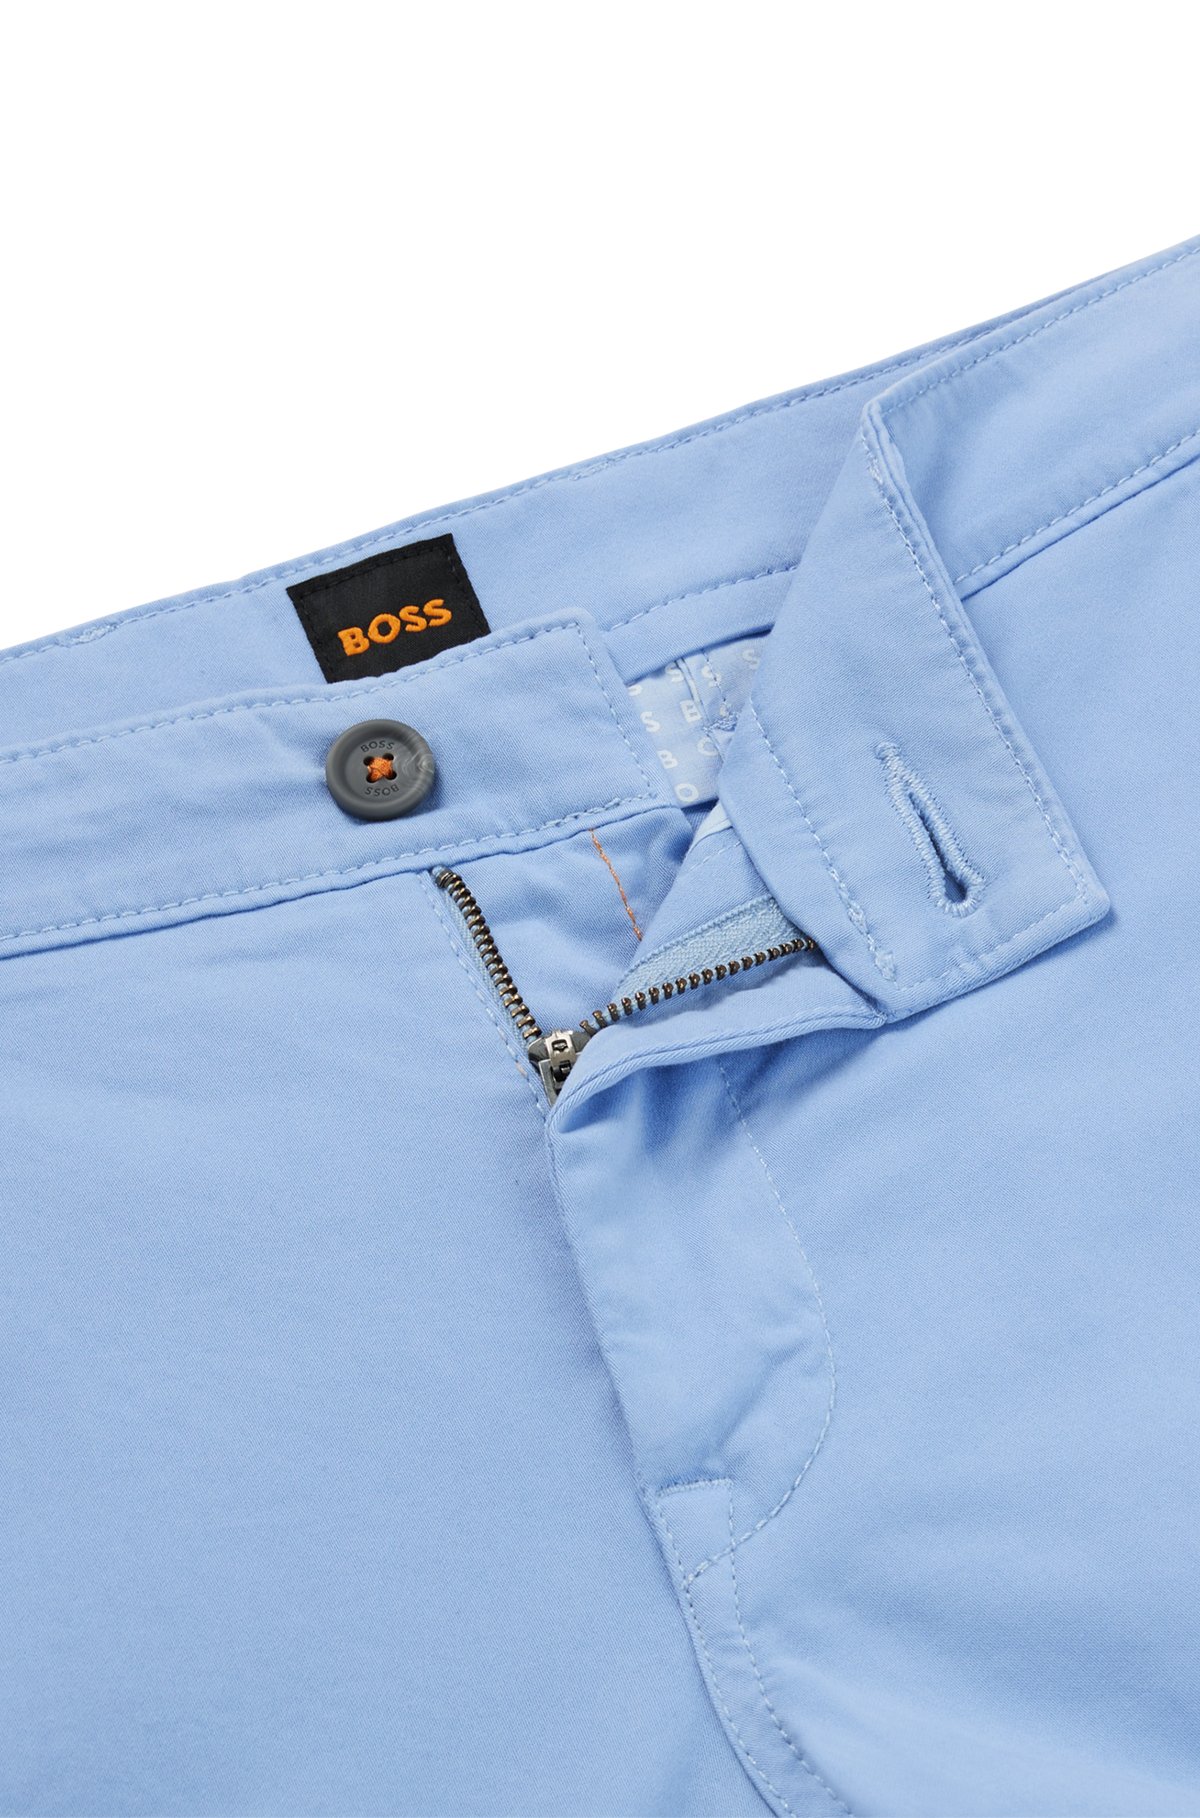 Slim-fit trousers in stretch-cotton satin, Light Blue